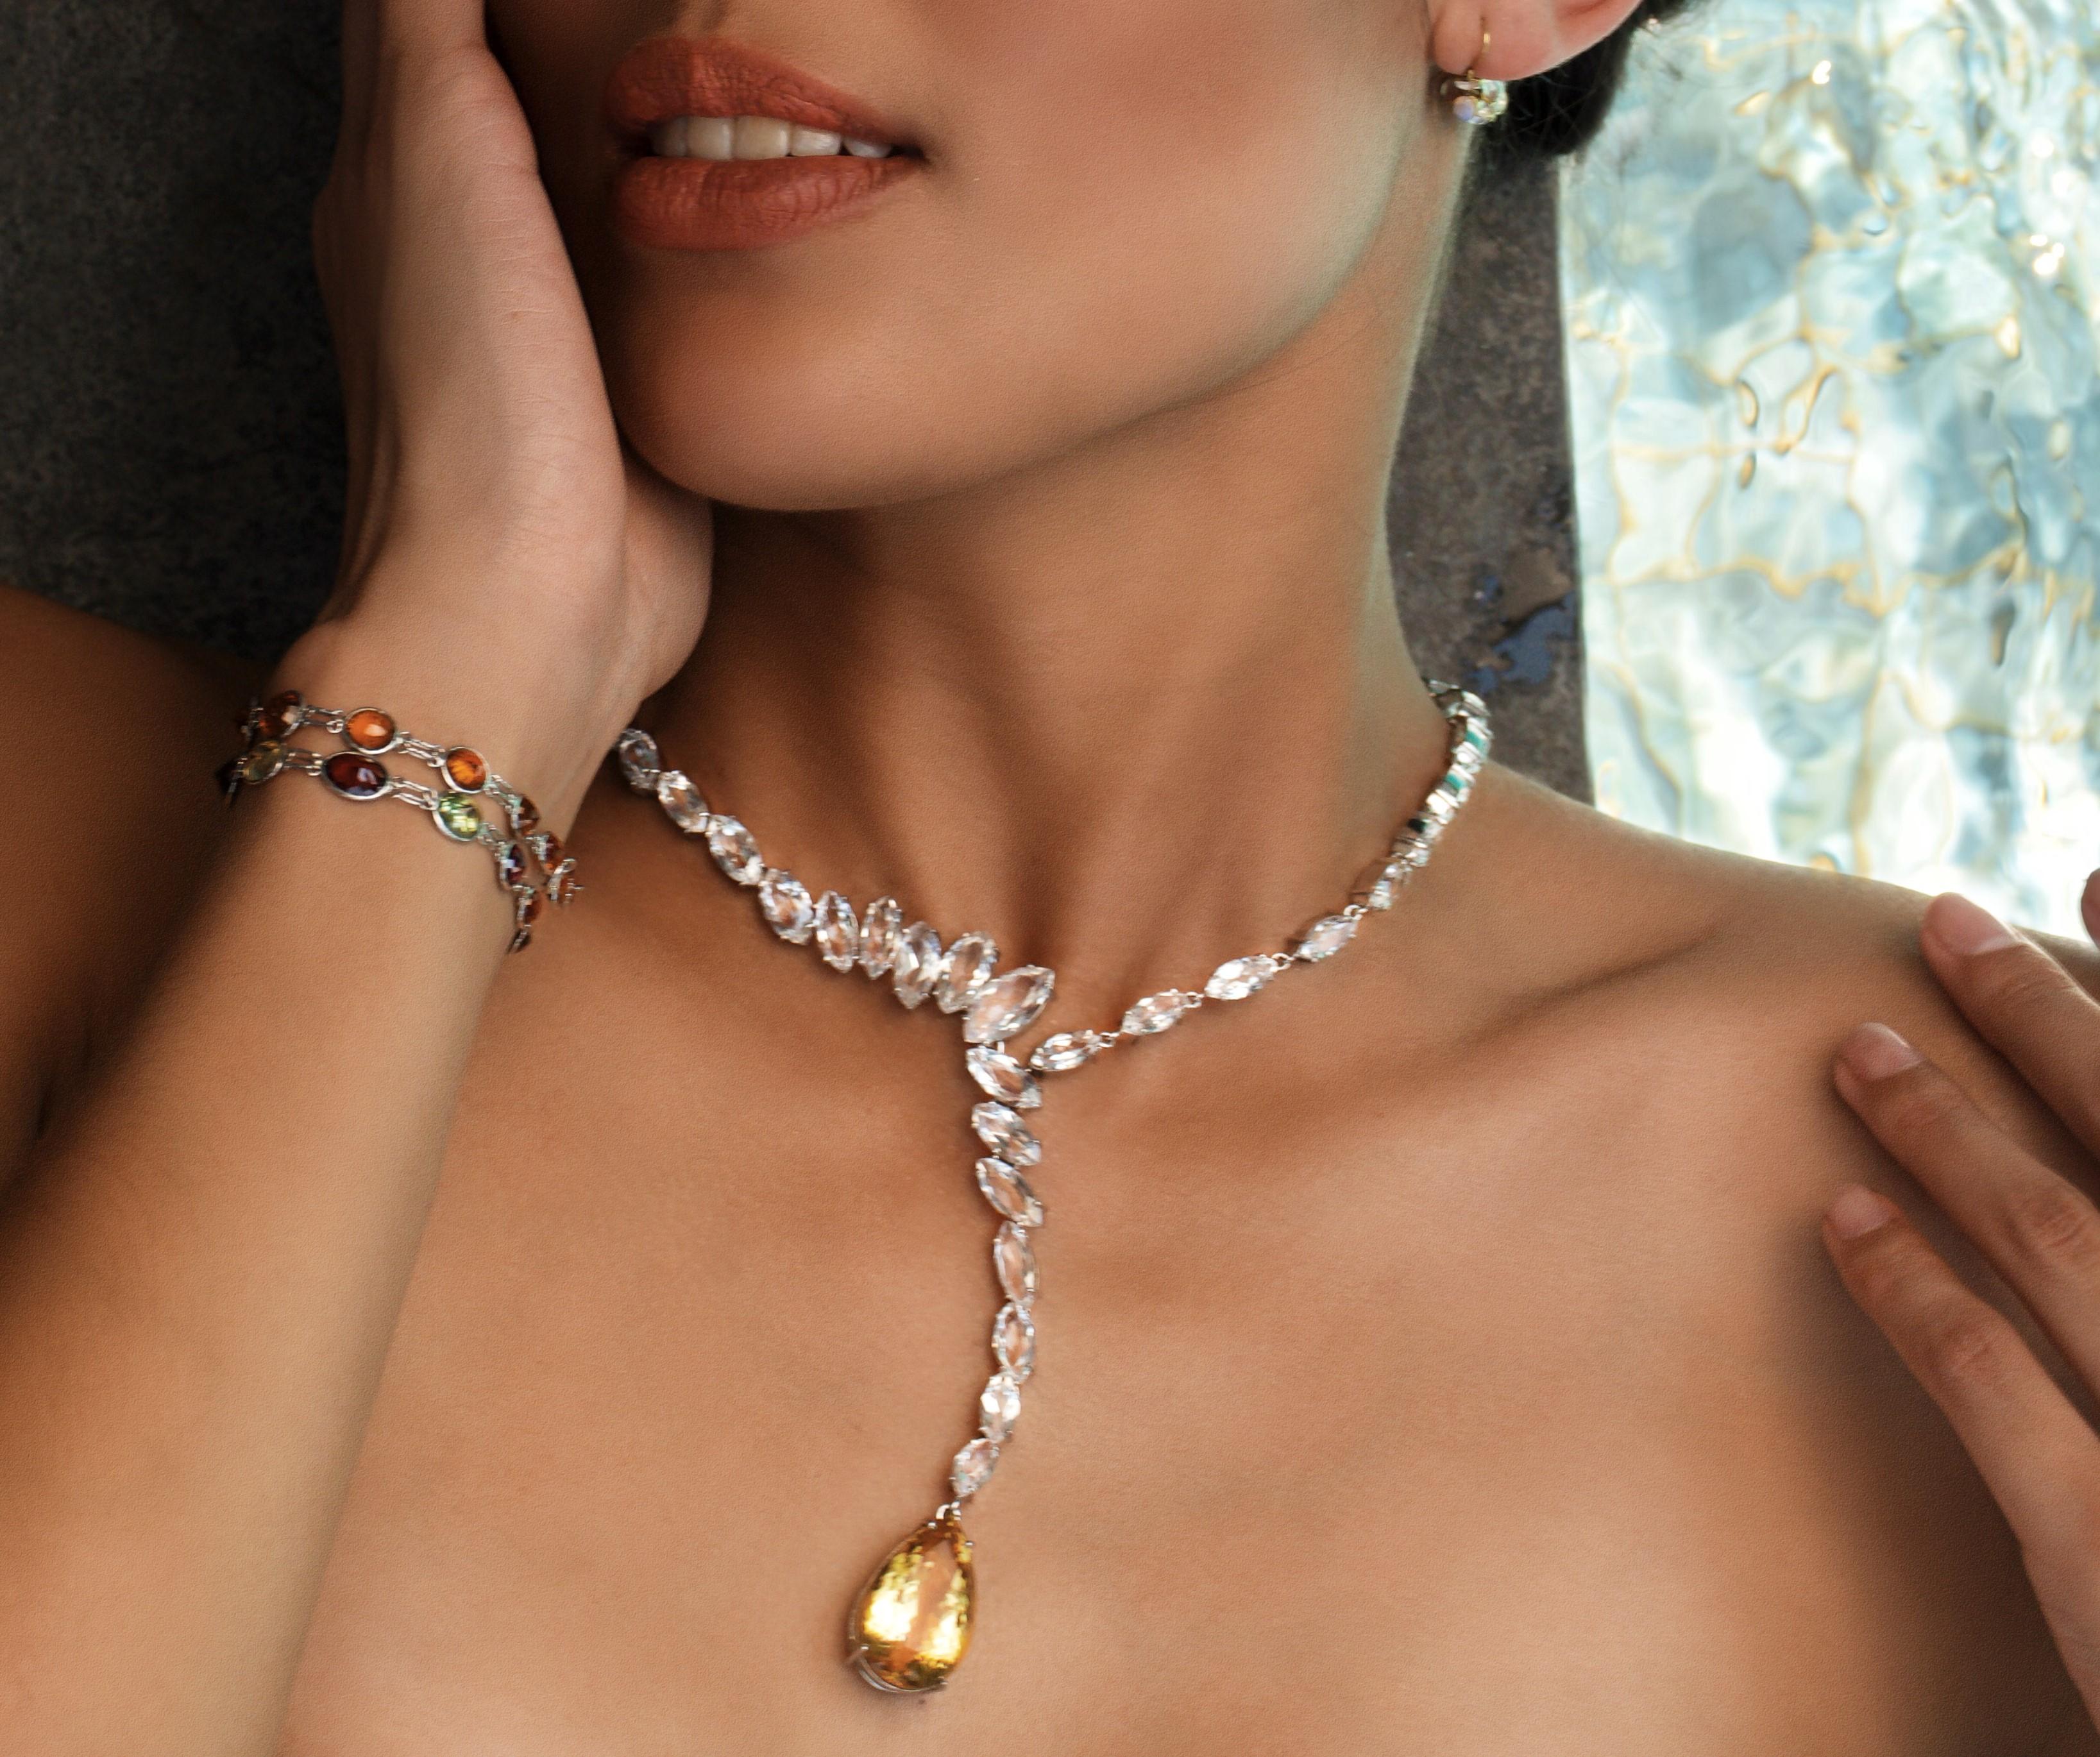 Introducing our 19ct Yellow Pear Cut Citrine with 38 White Topaz Choker Drop Necklace—an absolute stunner that radiates elegance. This masterpiece features a 19-carat pear-cut natural untreated citrine drop, a lariat-style with 7x oval white topaz